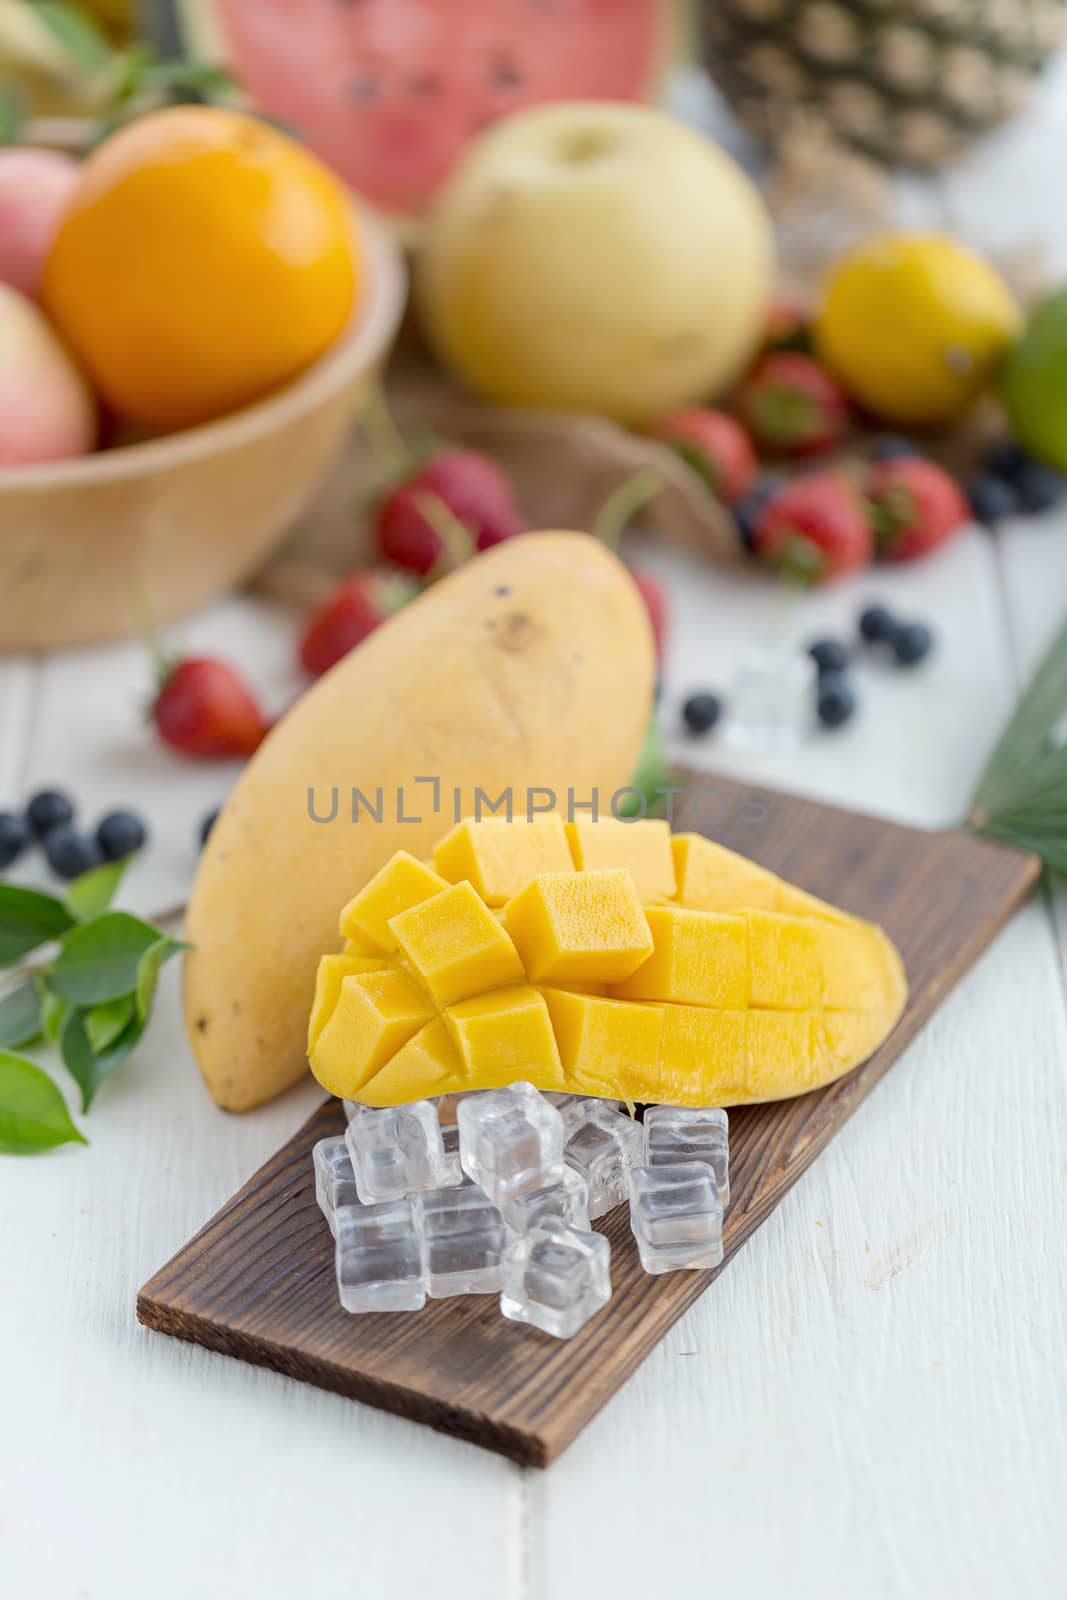 Ripe Mango on a wooden plate with ice cubes and fruit as backgro by kaiskynet